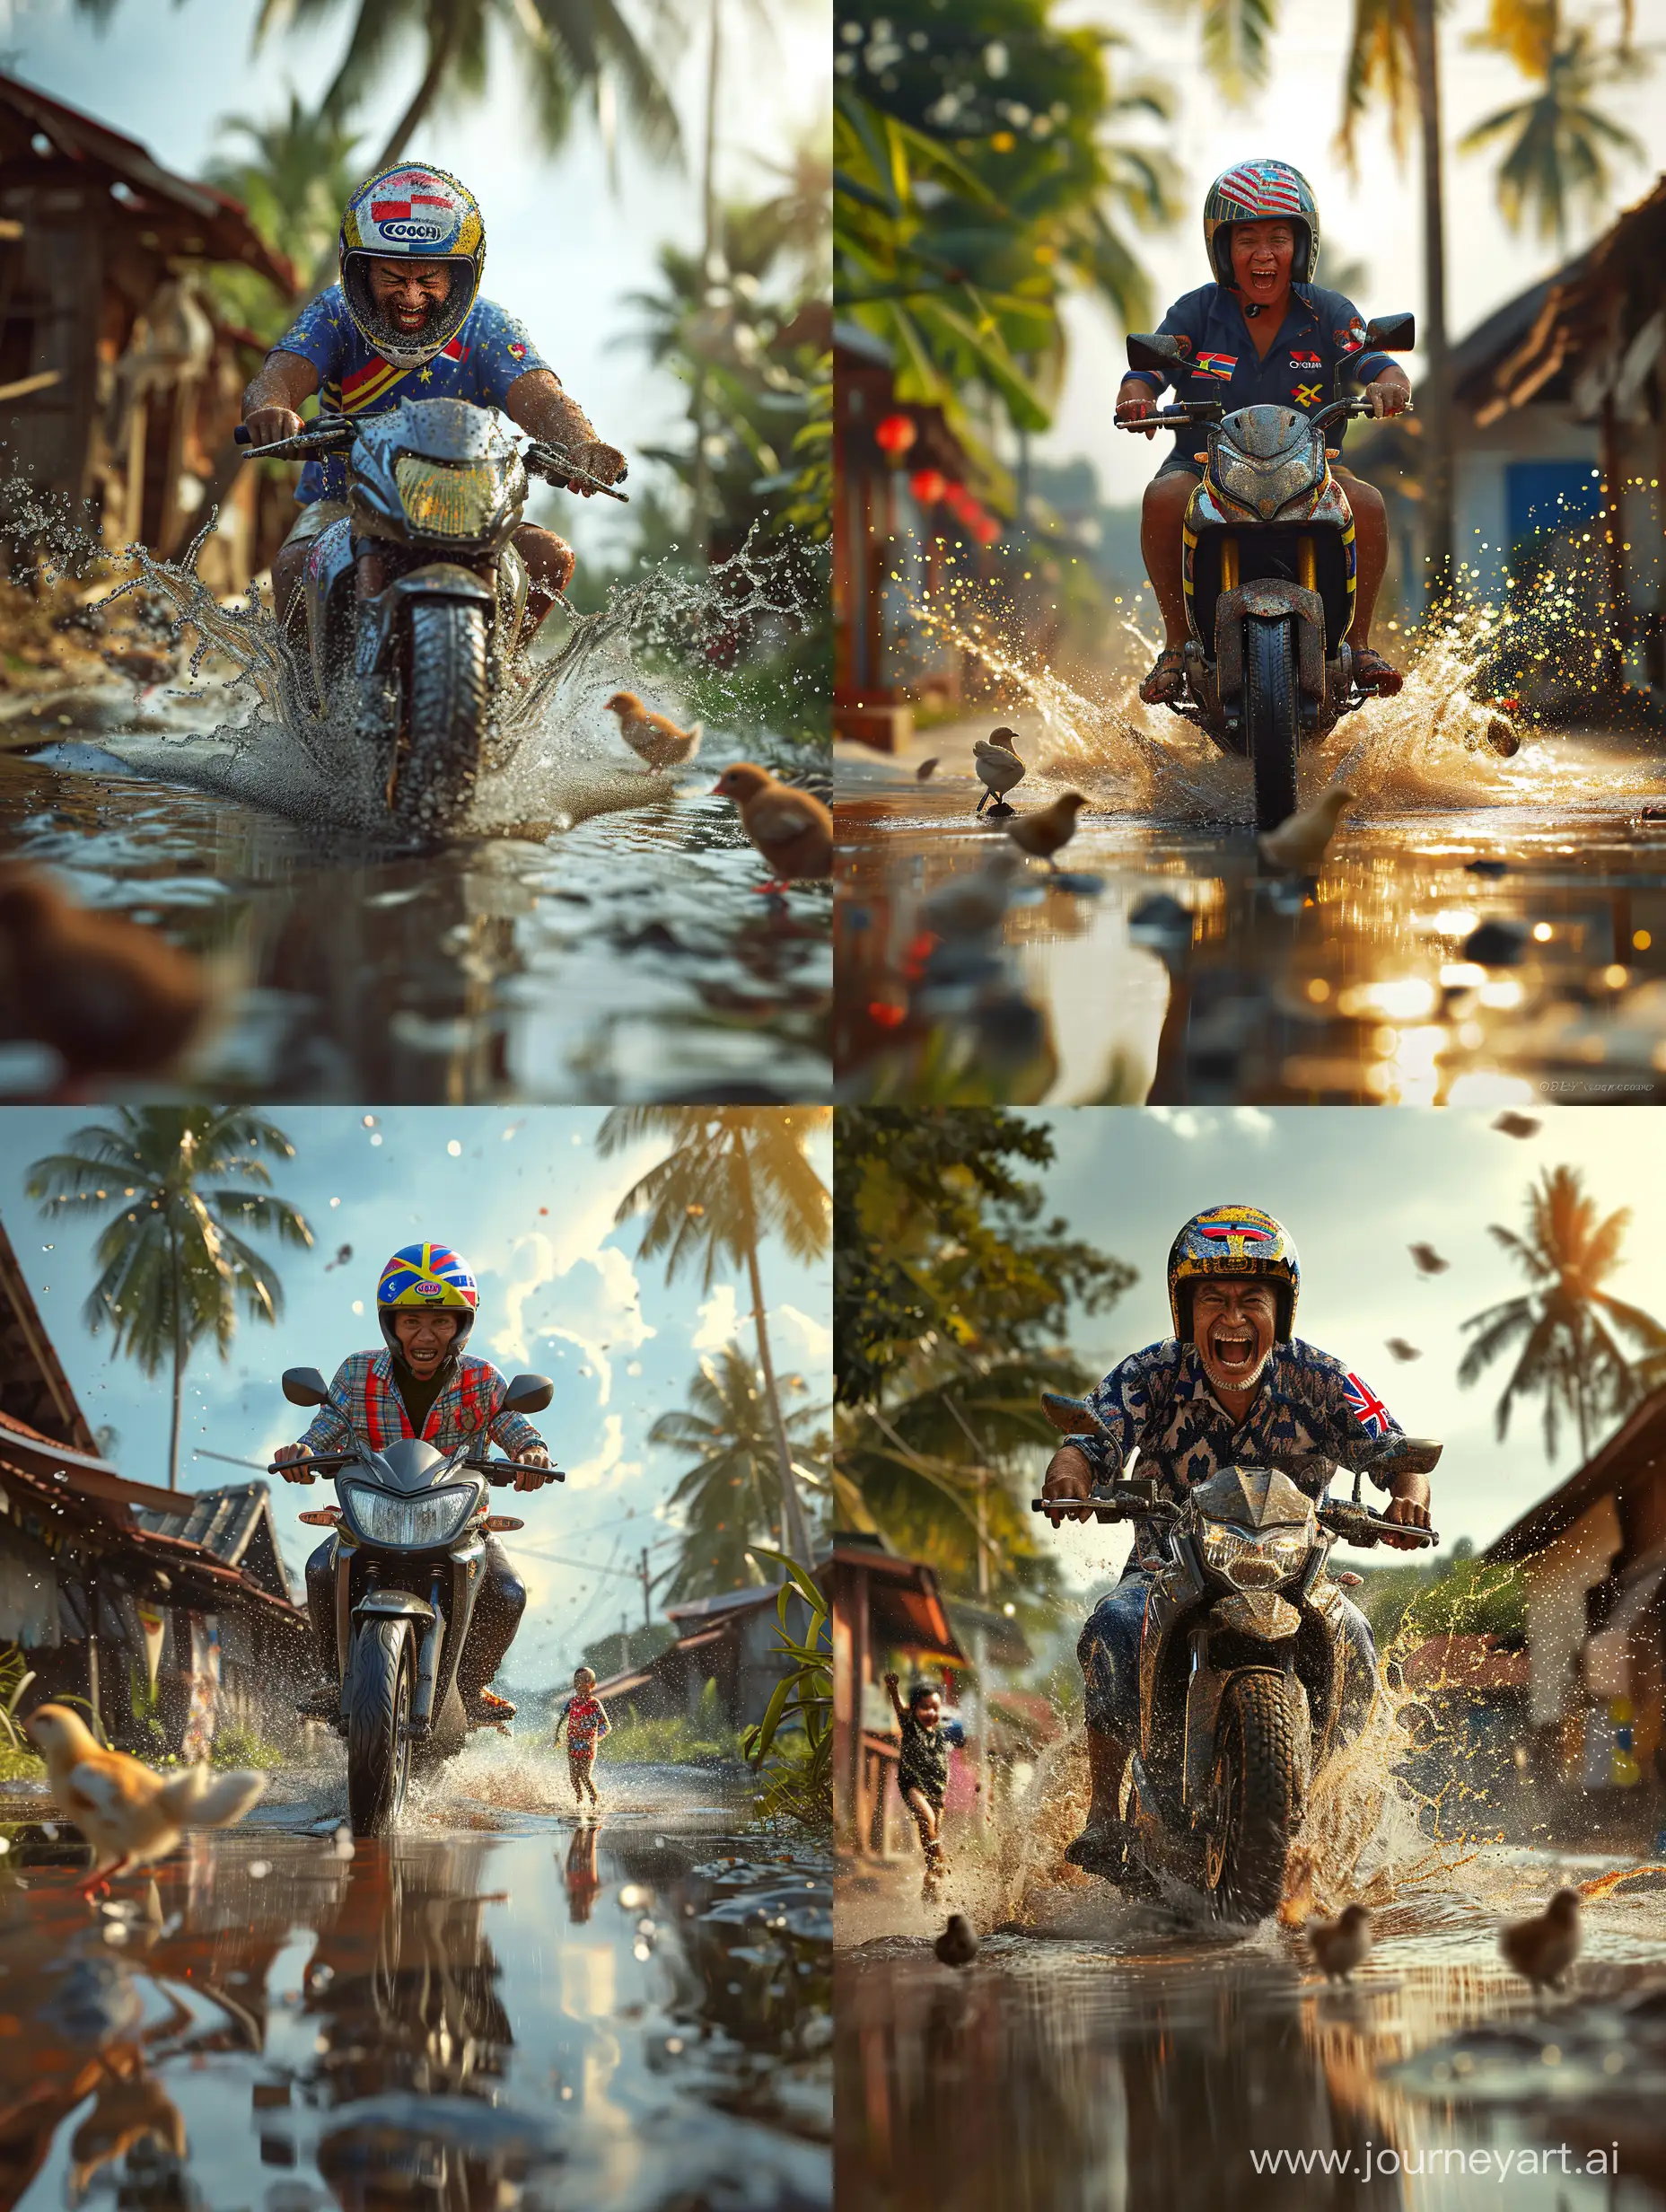 Thrilling-Malaysian-Superbike-Ride-with-Patriotic-Helmet-in-a-Village-Setting